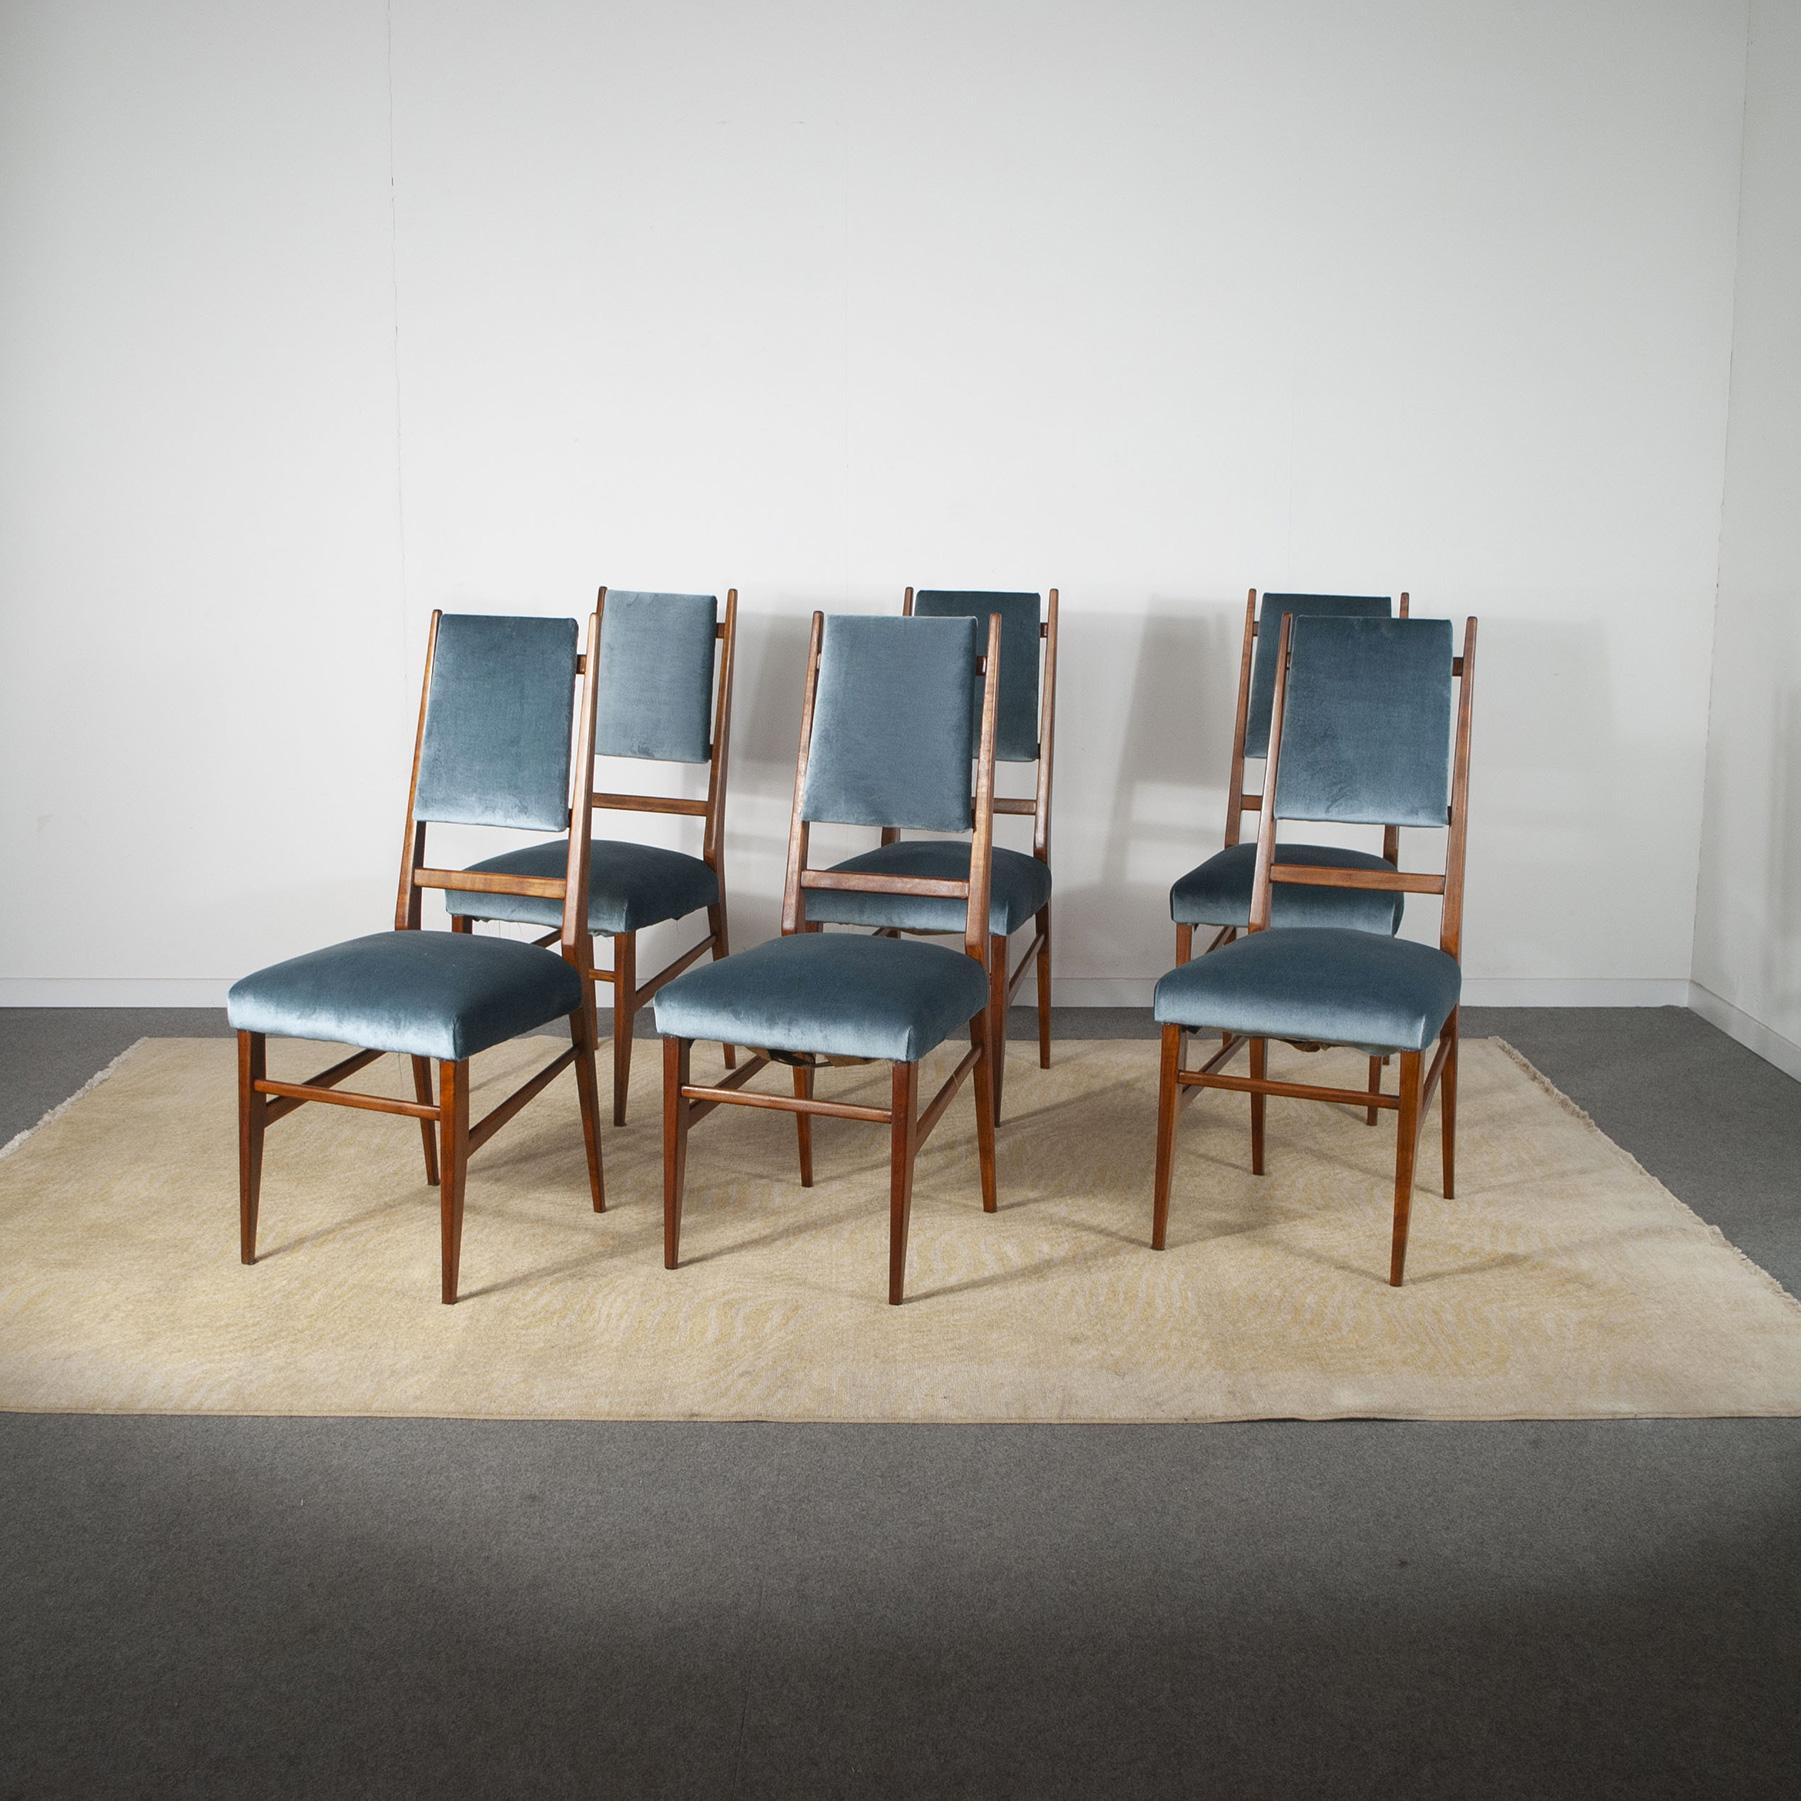 Elegant set consisting of six chairs with velvet seat and wooden frame with slender back, attributable to Carlo De Carli Italian production late 1950s. The unique design of this model makes the chair an object for true connoisseurs of iconic